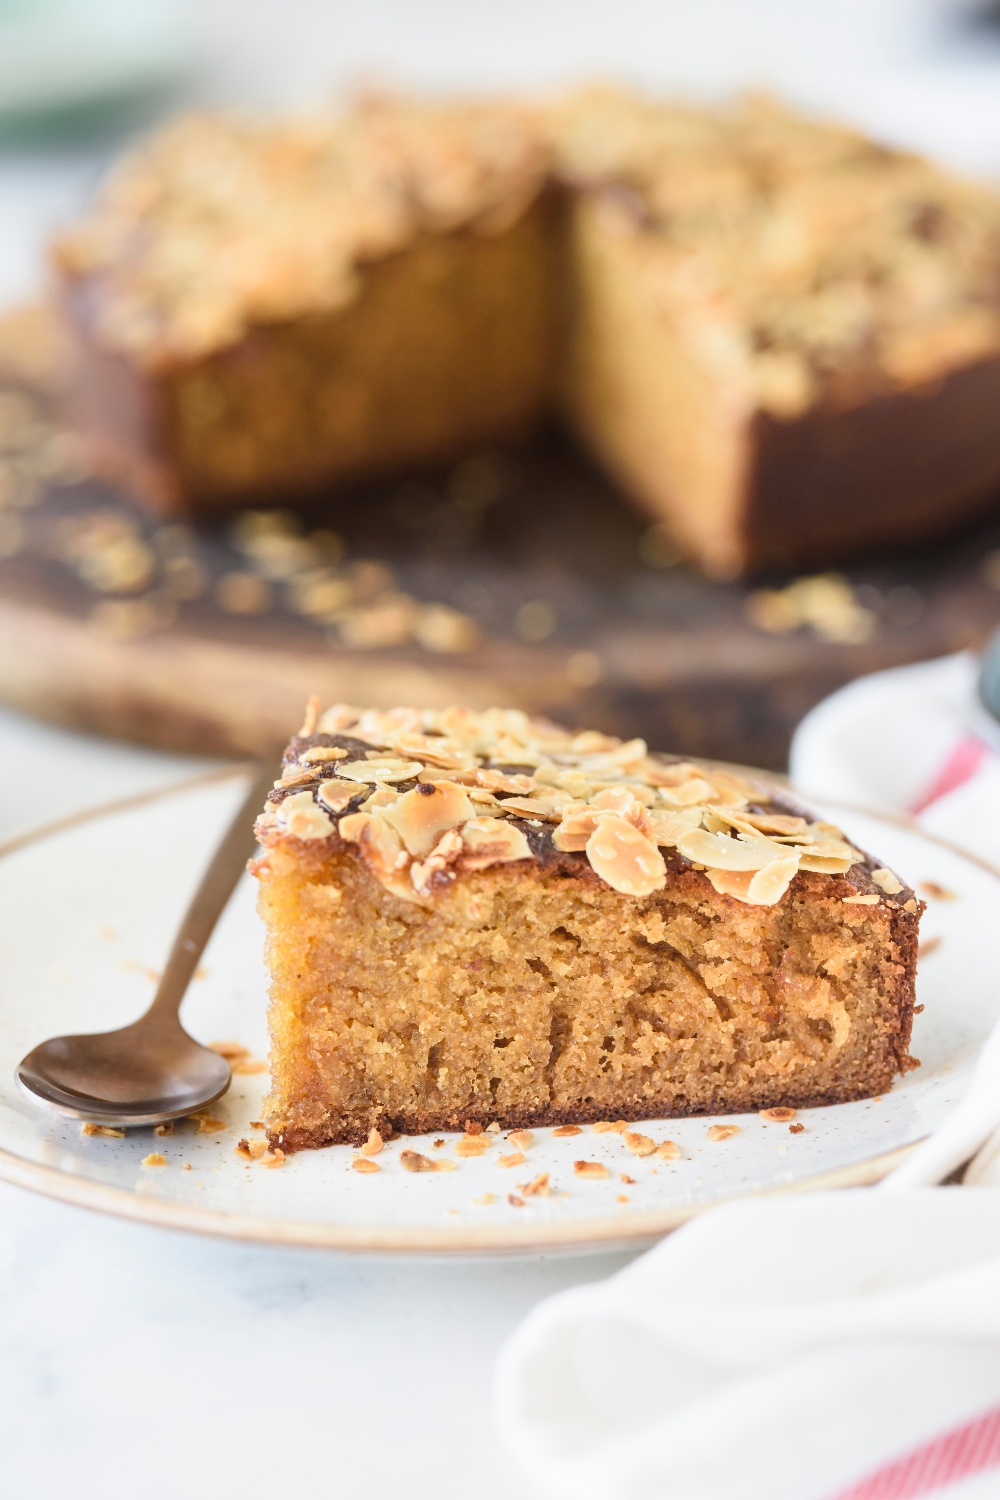 A slice of honey cake topped with sliced almonds on a plate with a spoon.